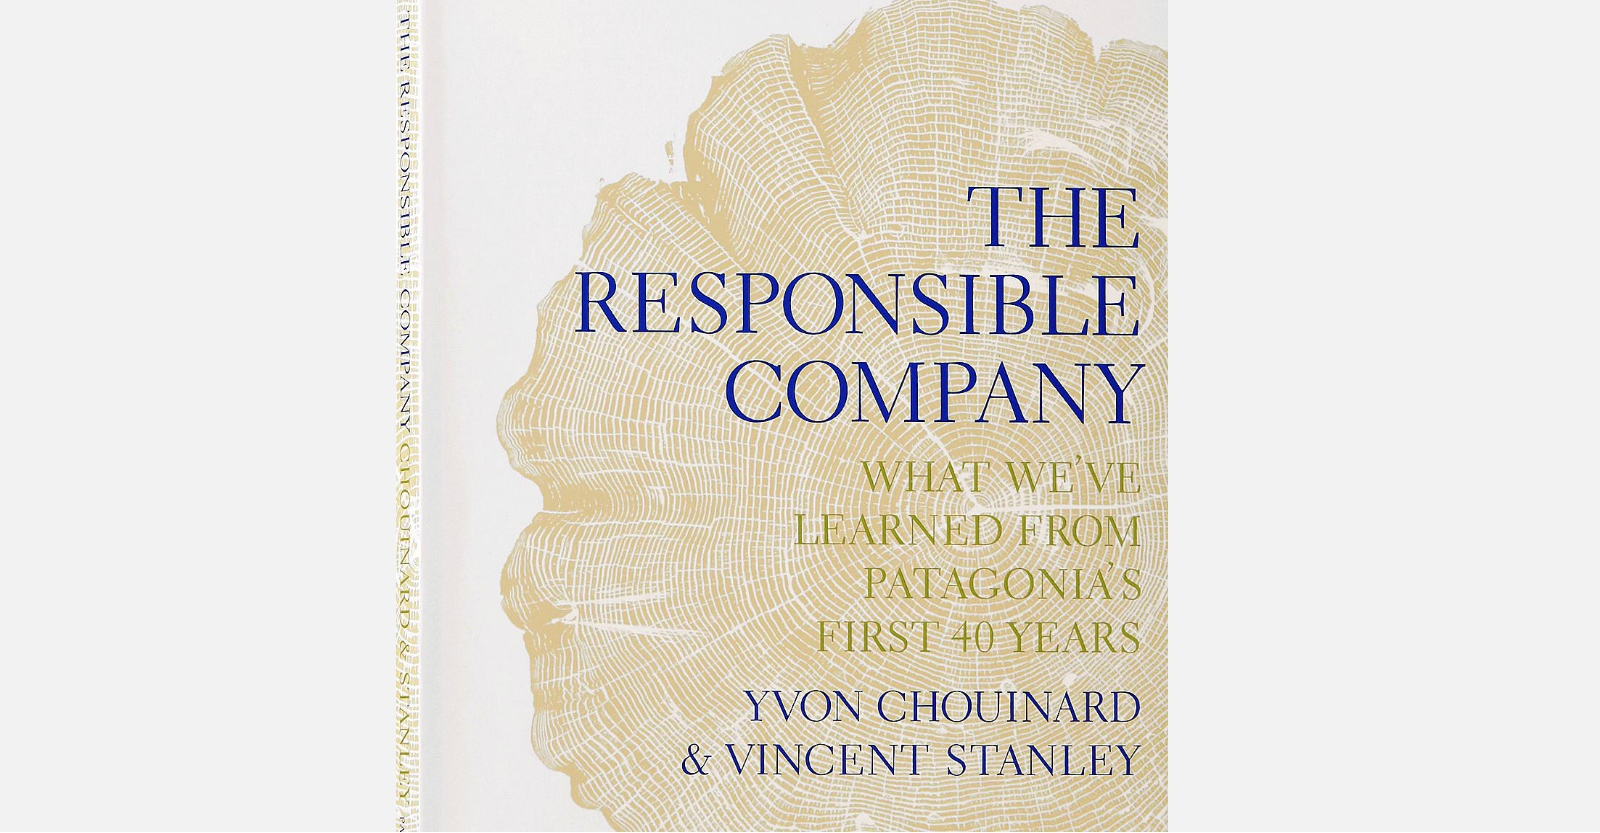 Excerpt from The Responsible Company by Yvon Chouinard - Patagonia Stories